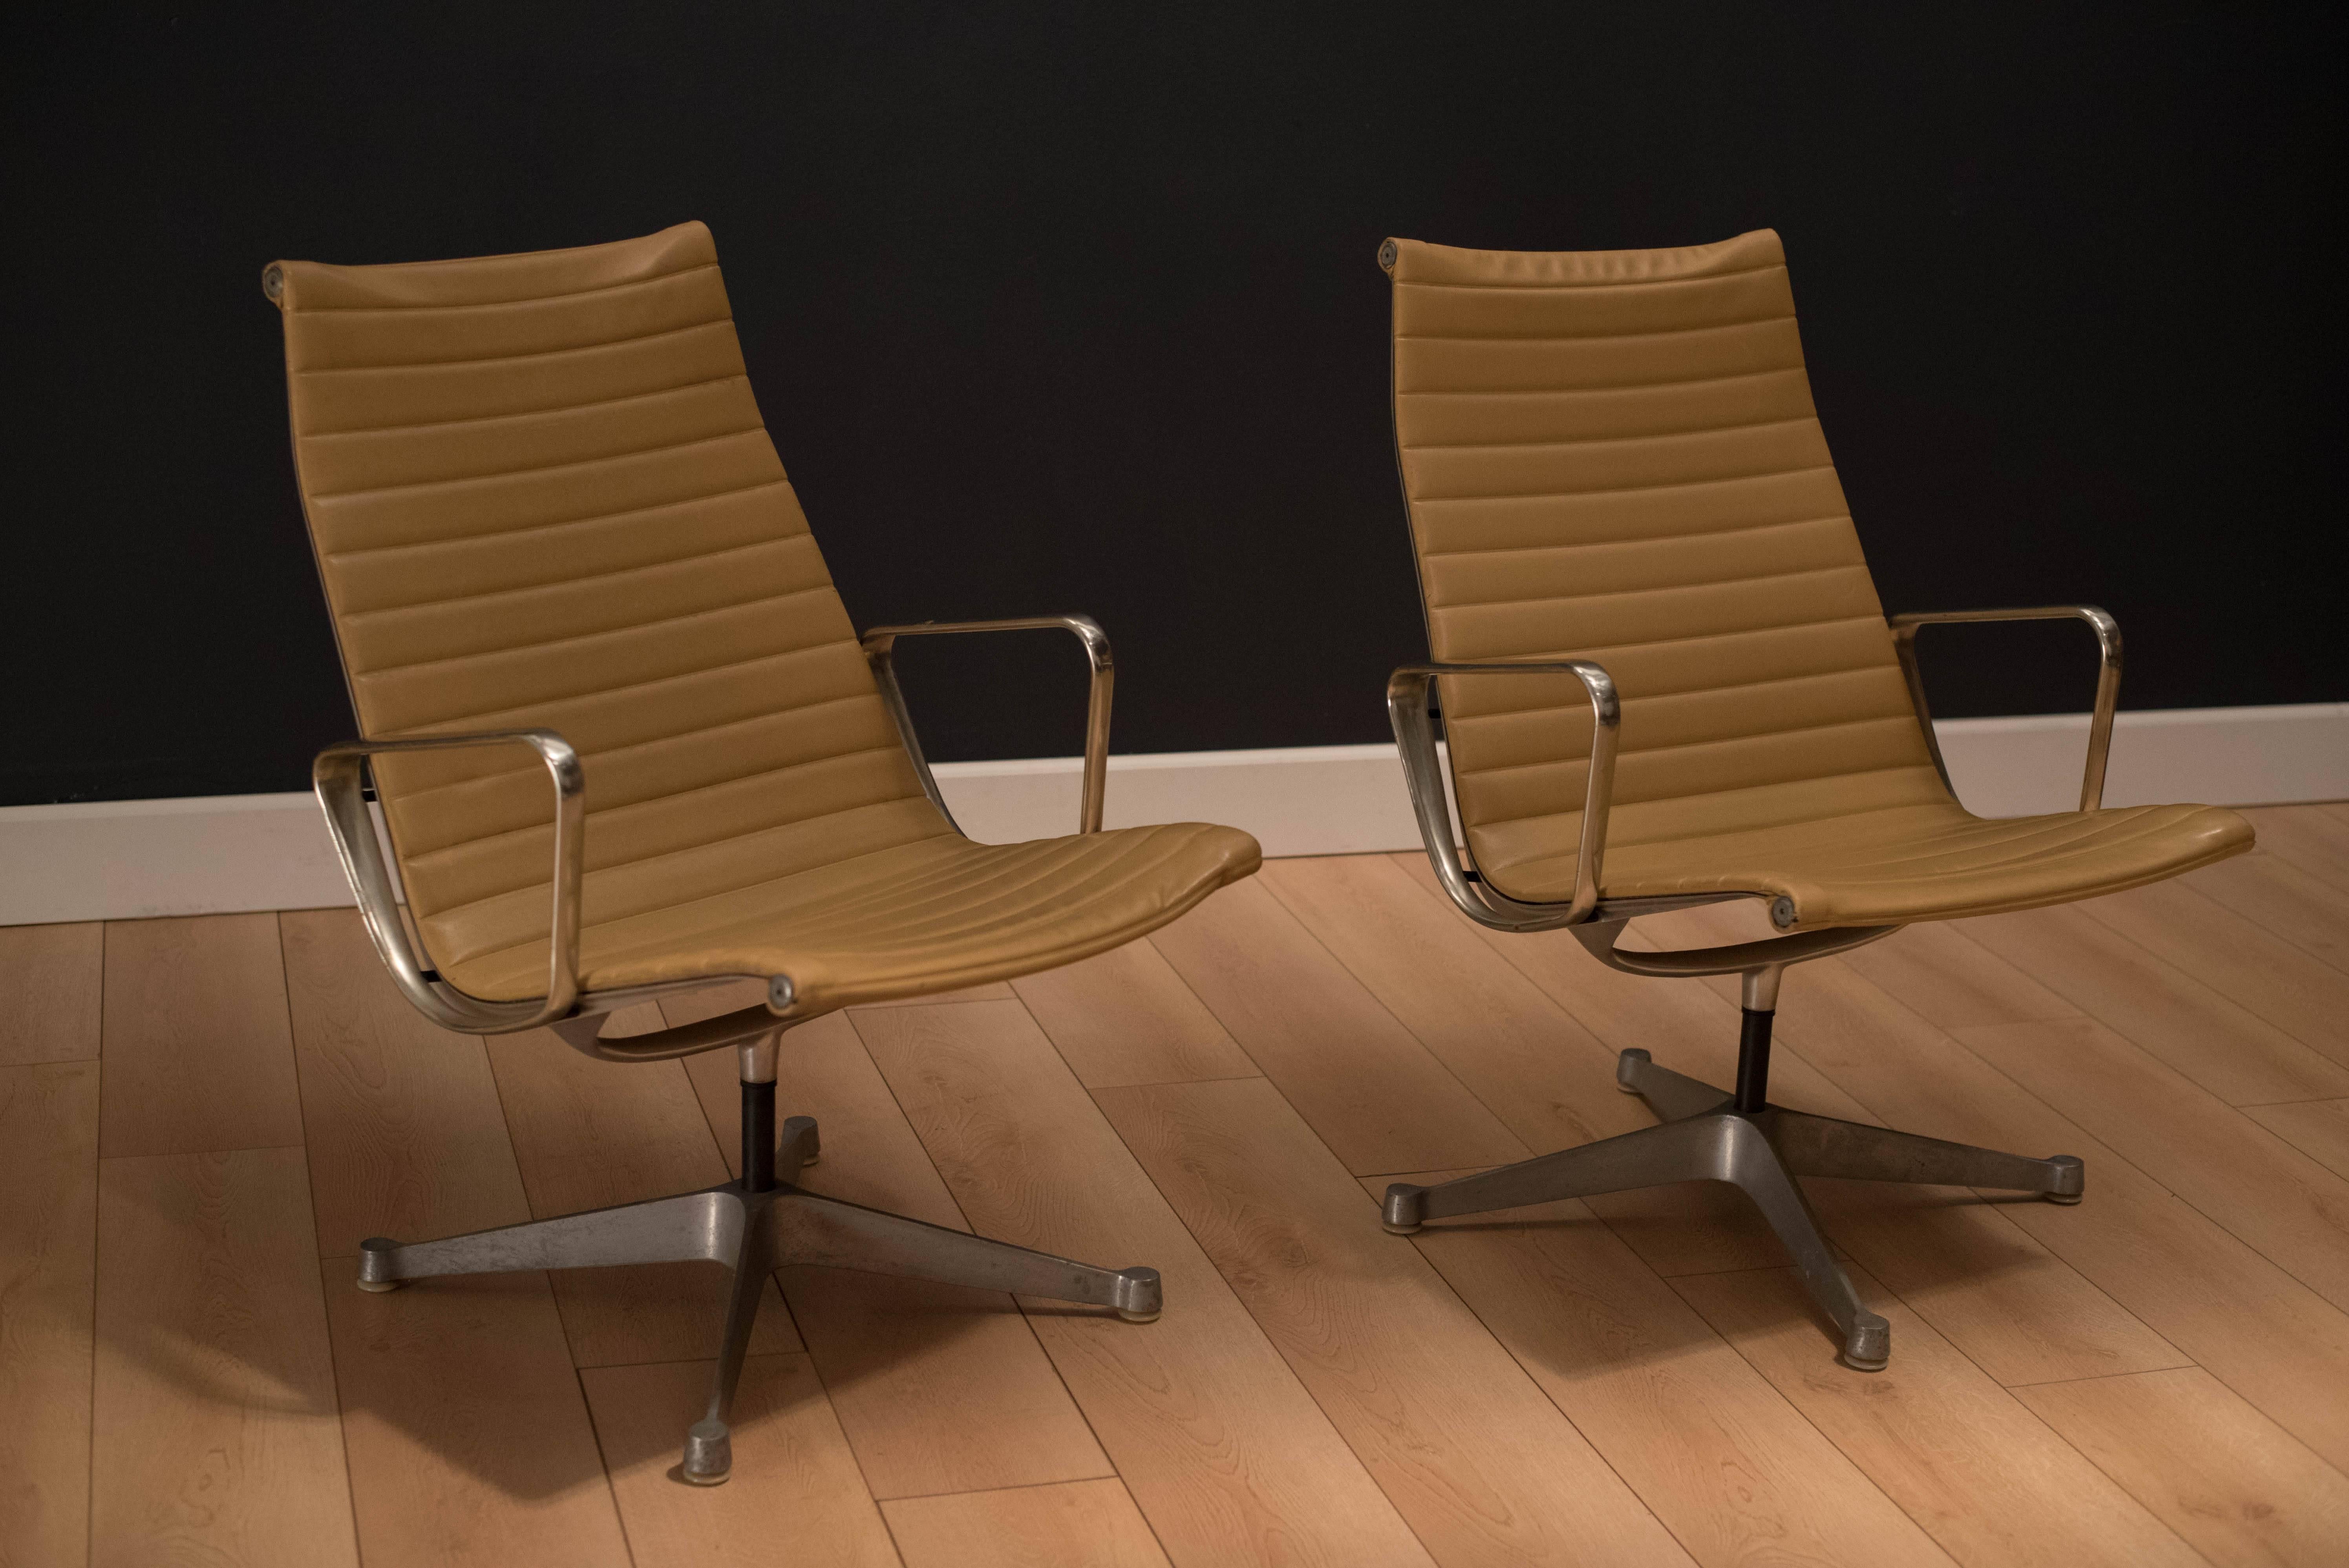 Pair of Aluminum Group swivel chairs designed by Charles and Ray Eames for Herman Miller. Original tan Naugahyde upholstery with aluminum arms. Price is for the pair. 

 